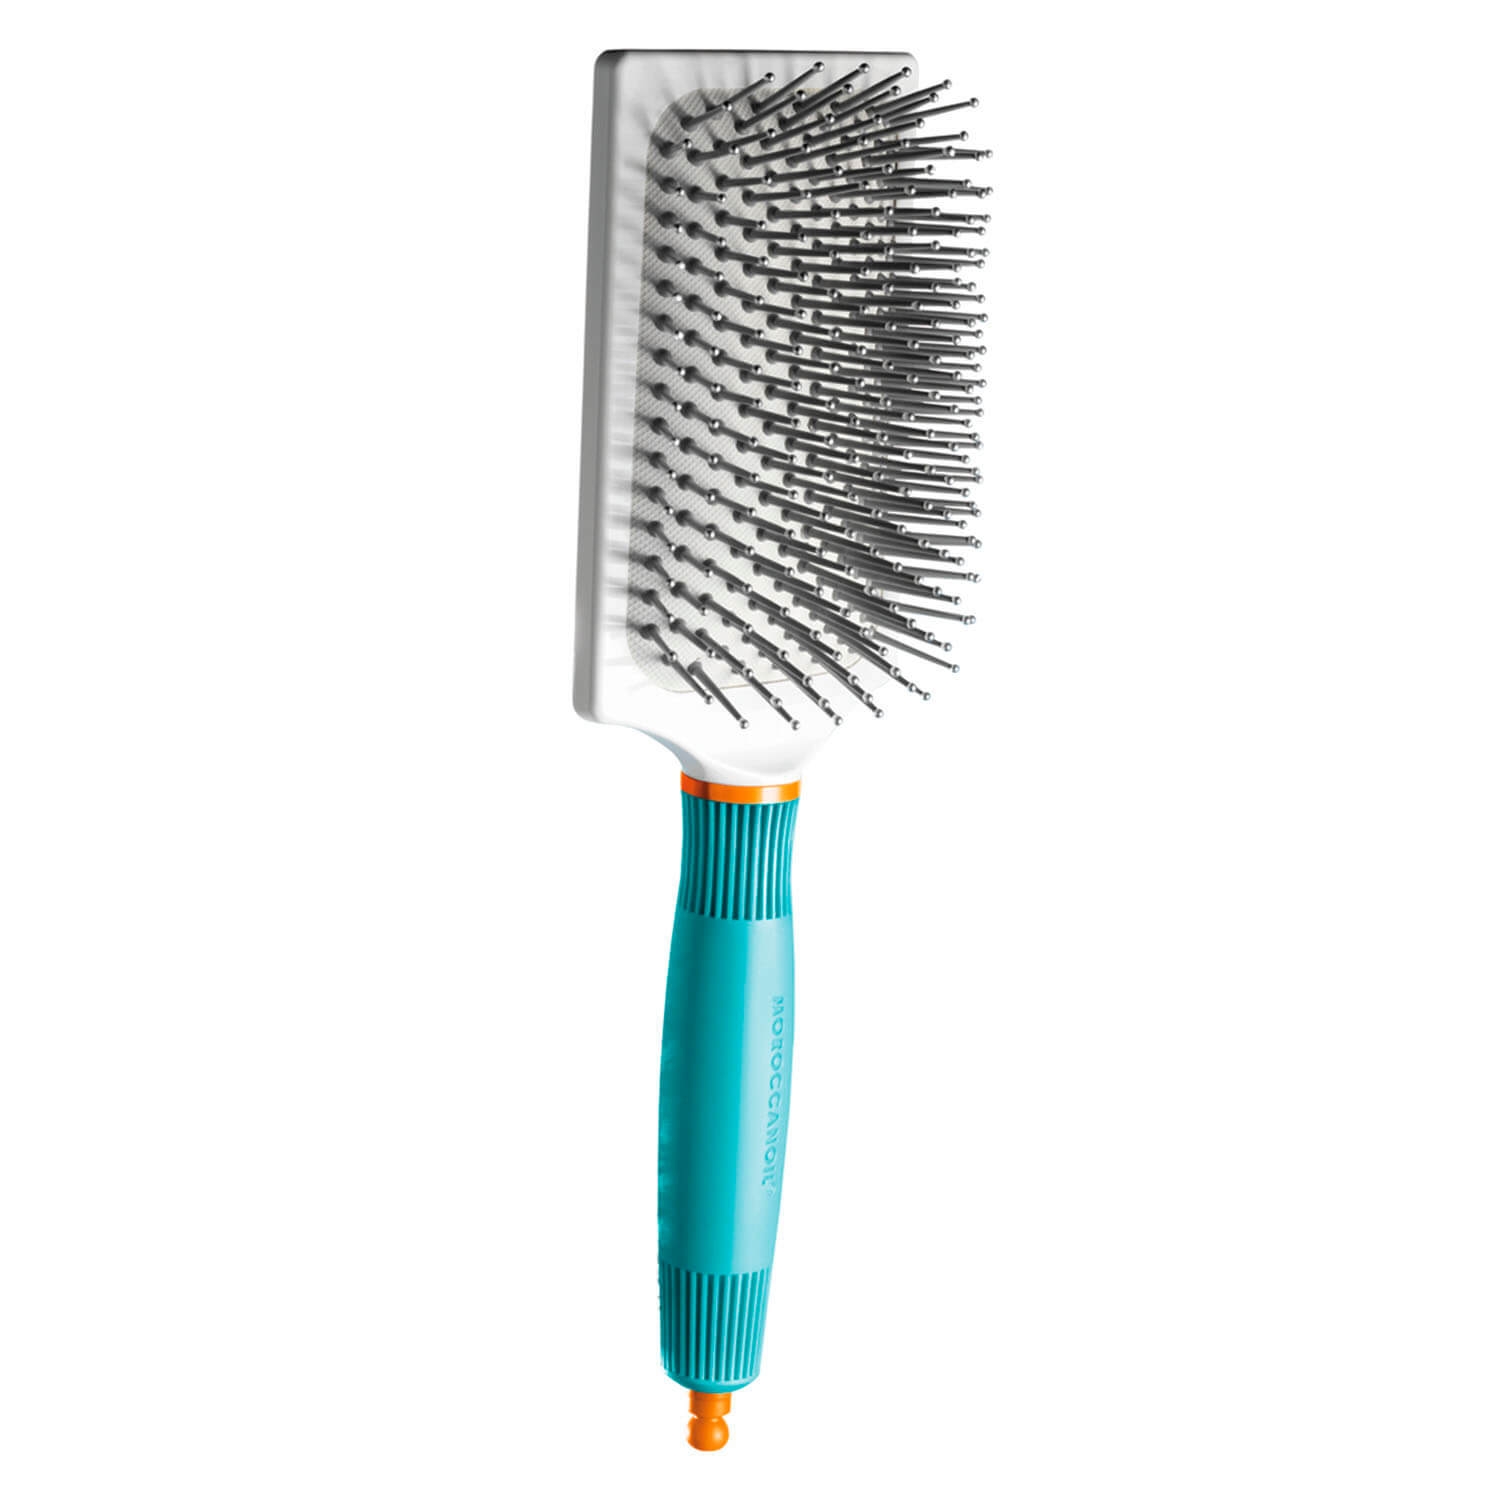 Product image from Moroccanoil - Paddle Brush